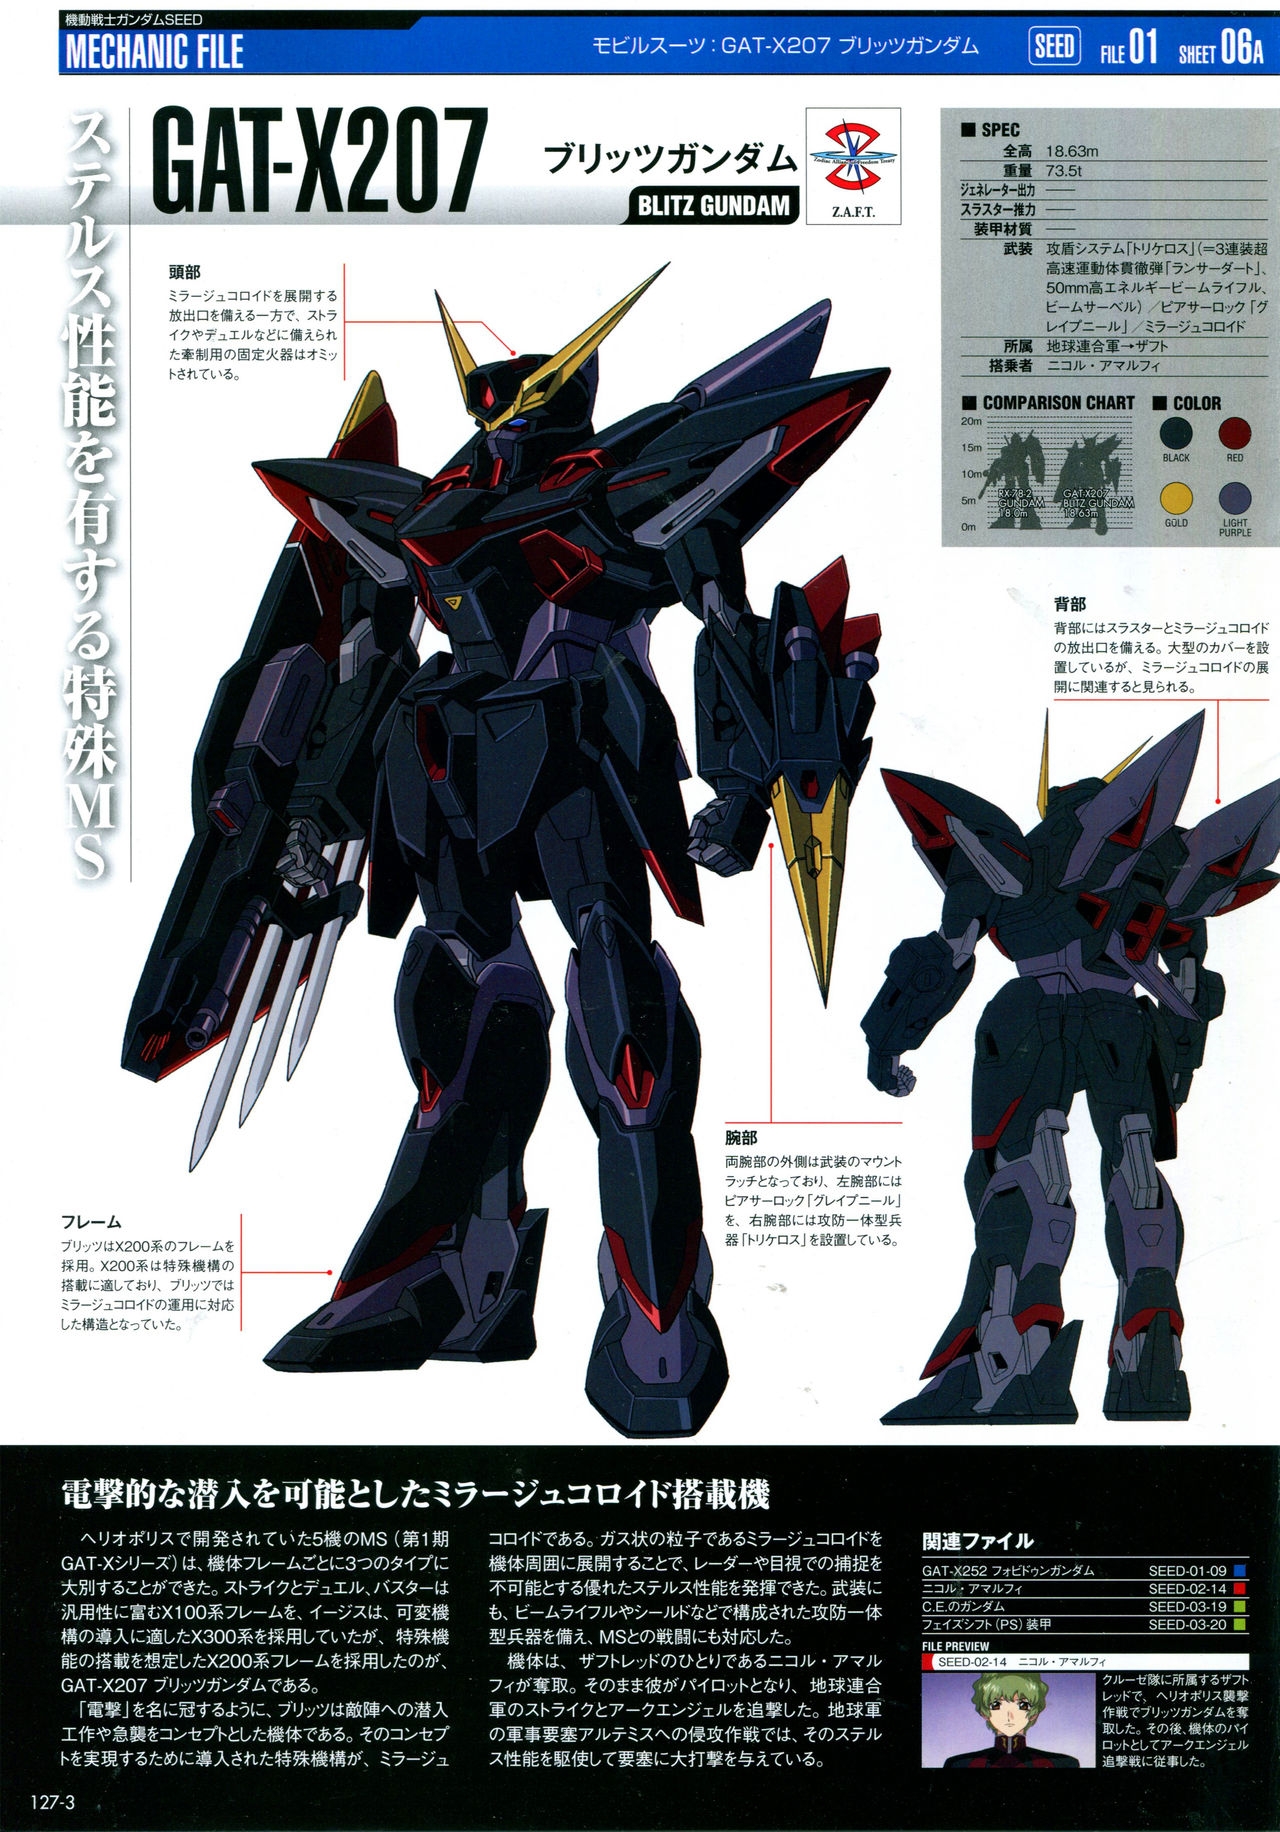 The Official Gundam Perfect File No.127 6